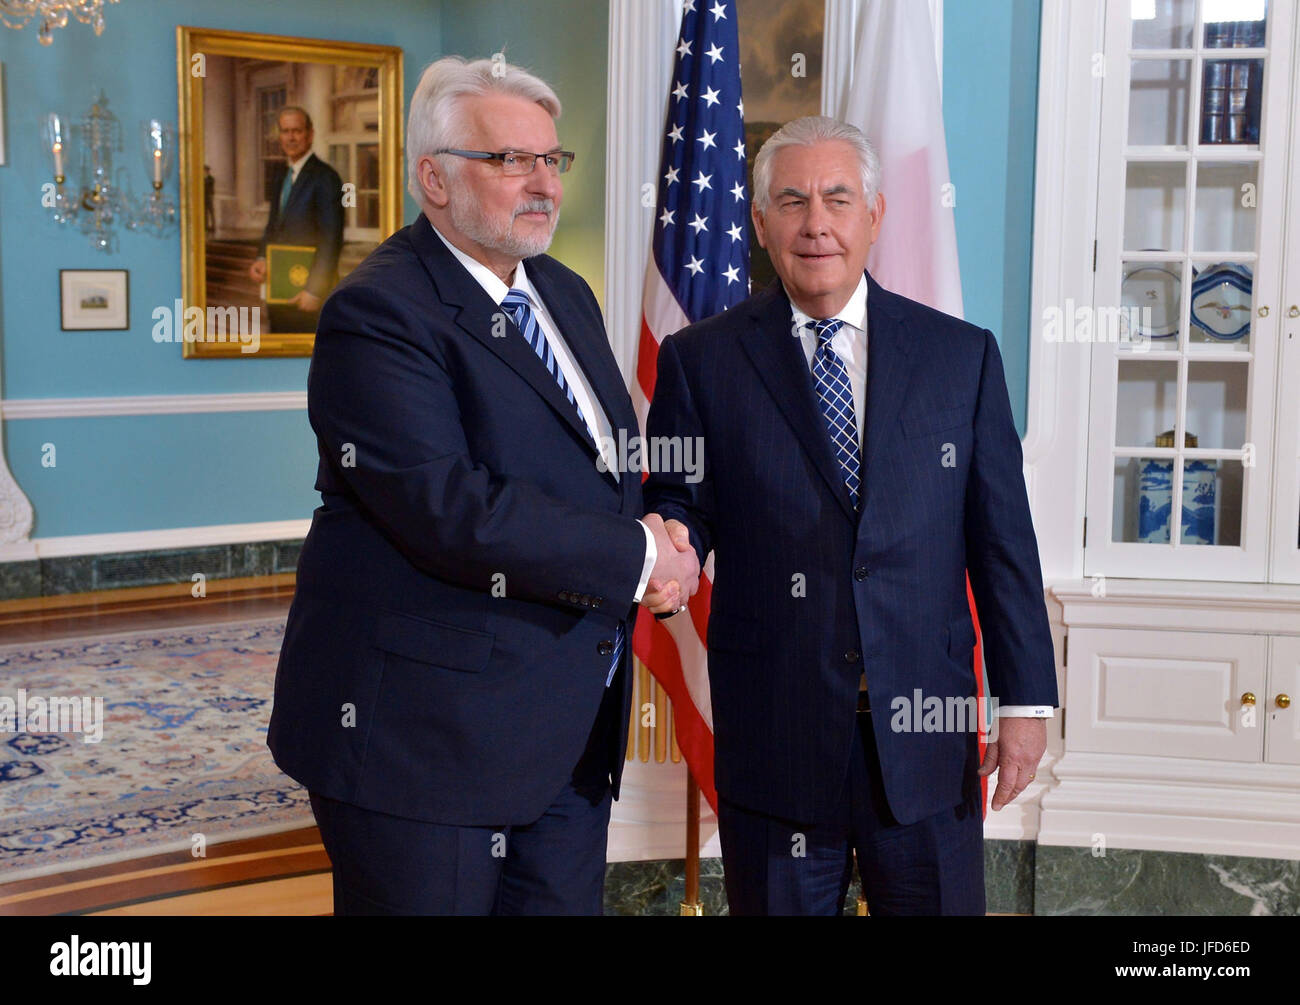 U.S. Secretary of State Rex Tillerson shakes hands with Polish Foreign Minister Witold Waszczykowski at the U.S. Department of State in Washington, D.C., on April 19, 2017. Stock Photo